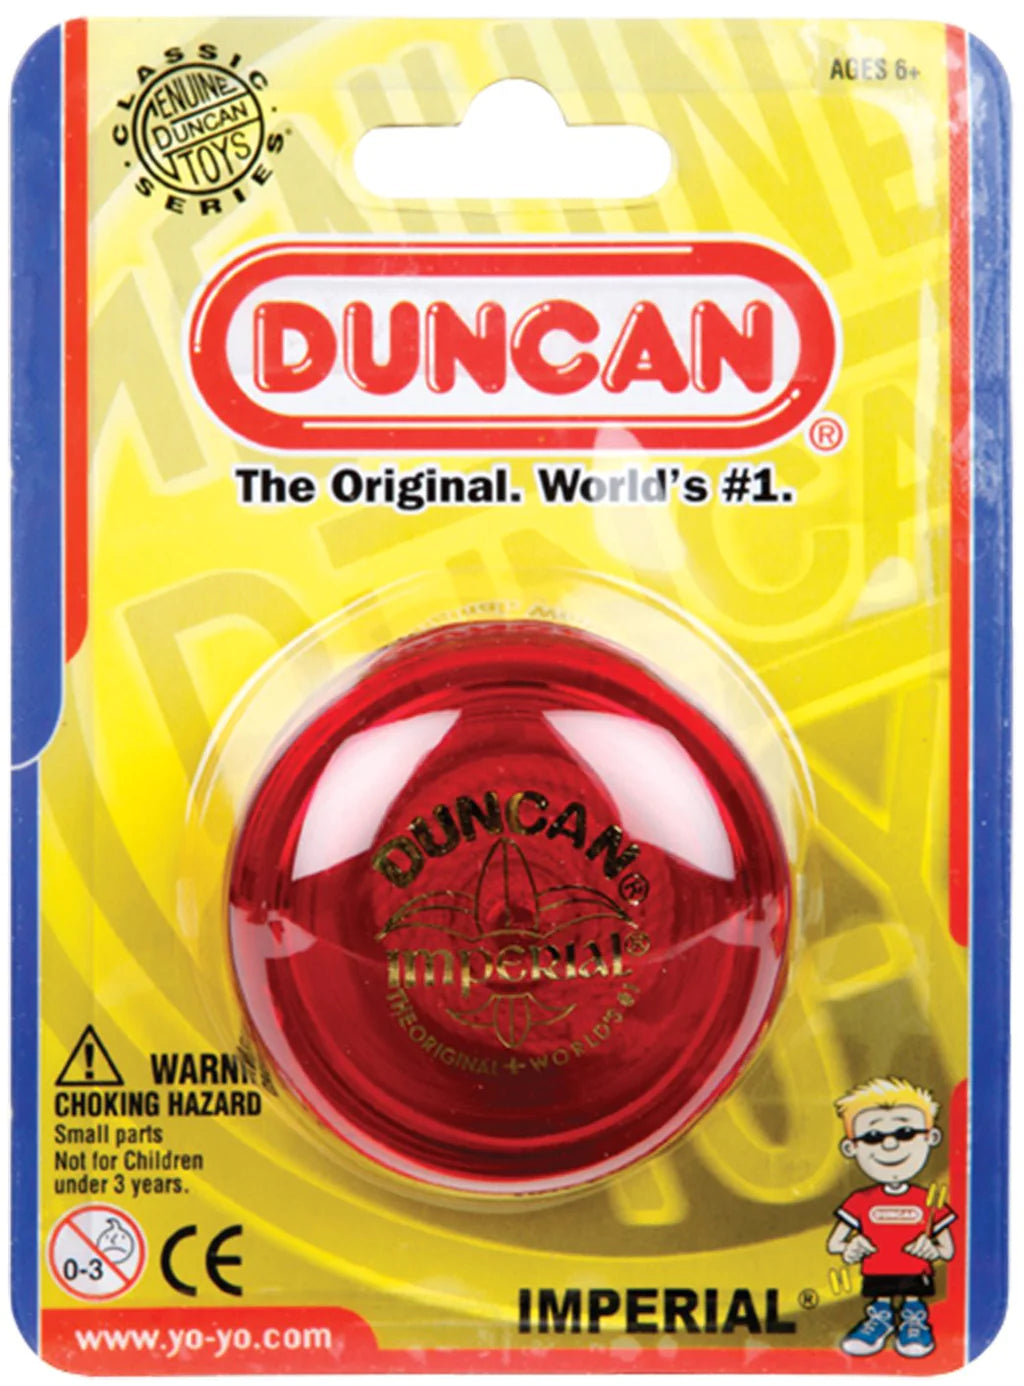 Classic Duncan Imperial Yo-Yo in Red
The classic Duncan Imperial yo-yo in a vibrant red color, ready for play in the toy section.